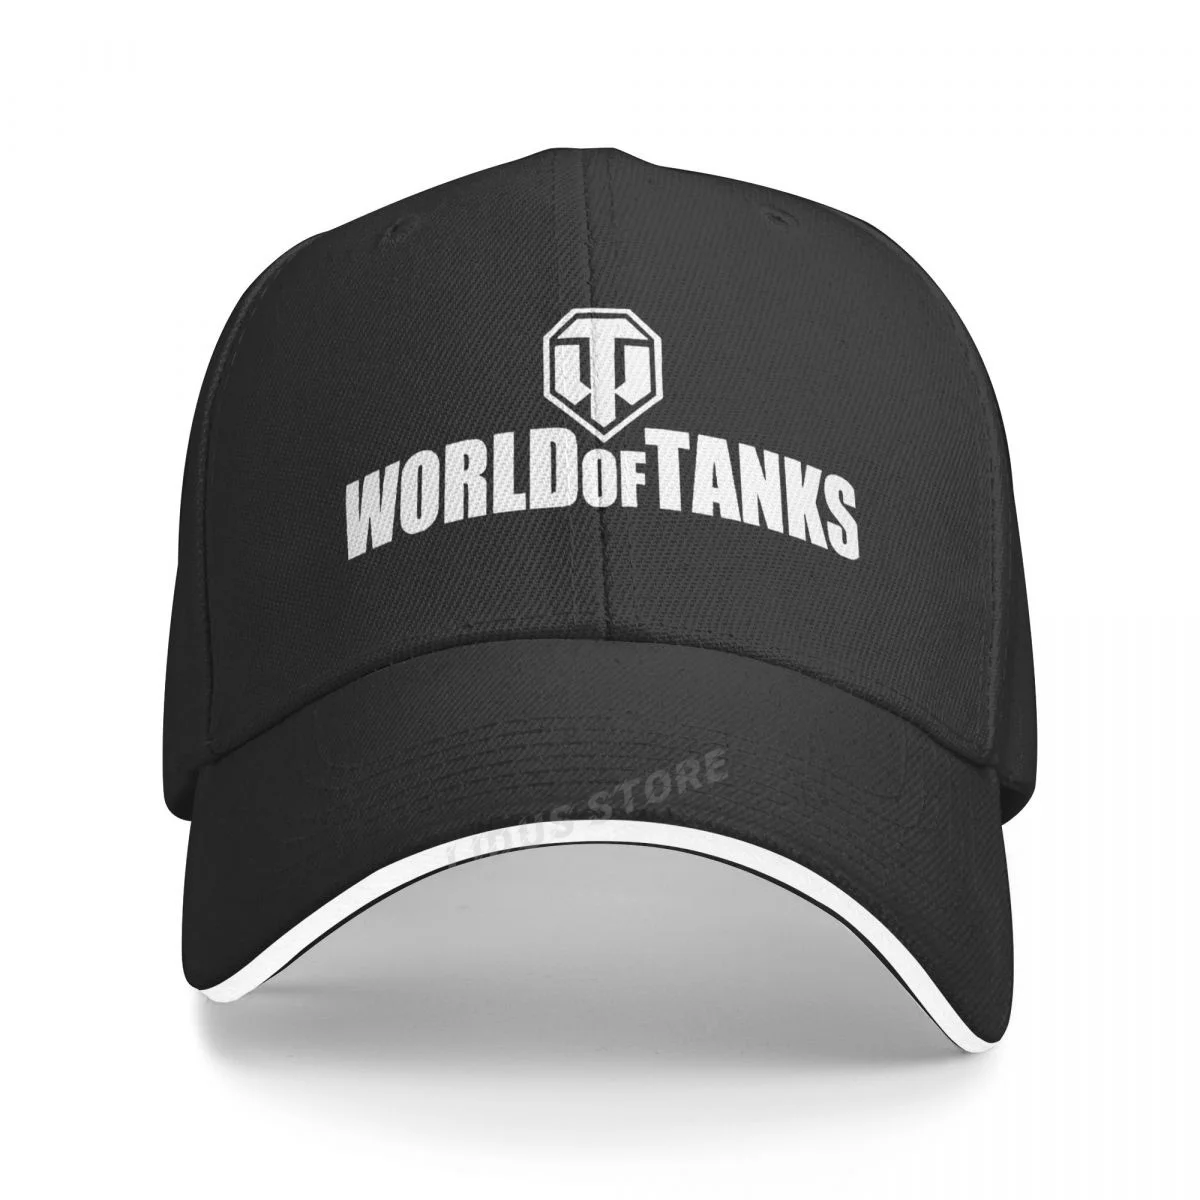 World Of Tanks Baseball Caps Summer Casual Adjustable Men Outdoor Hats Cool Game Caps